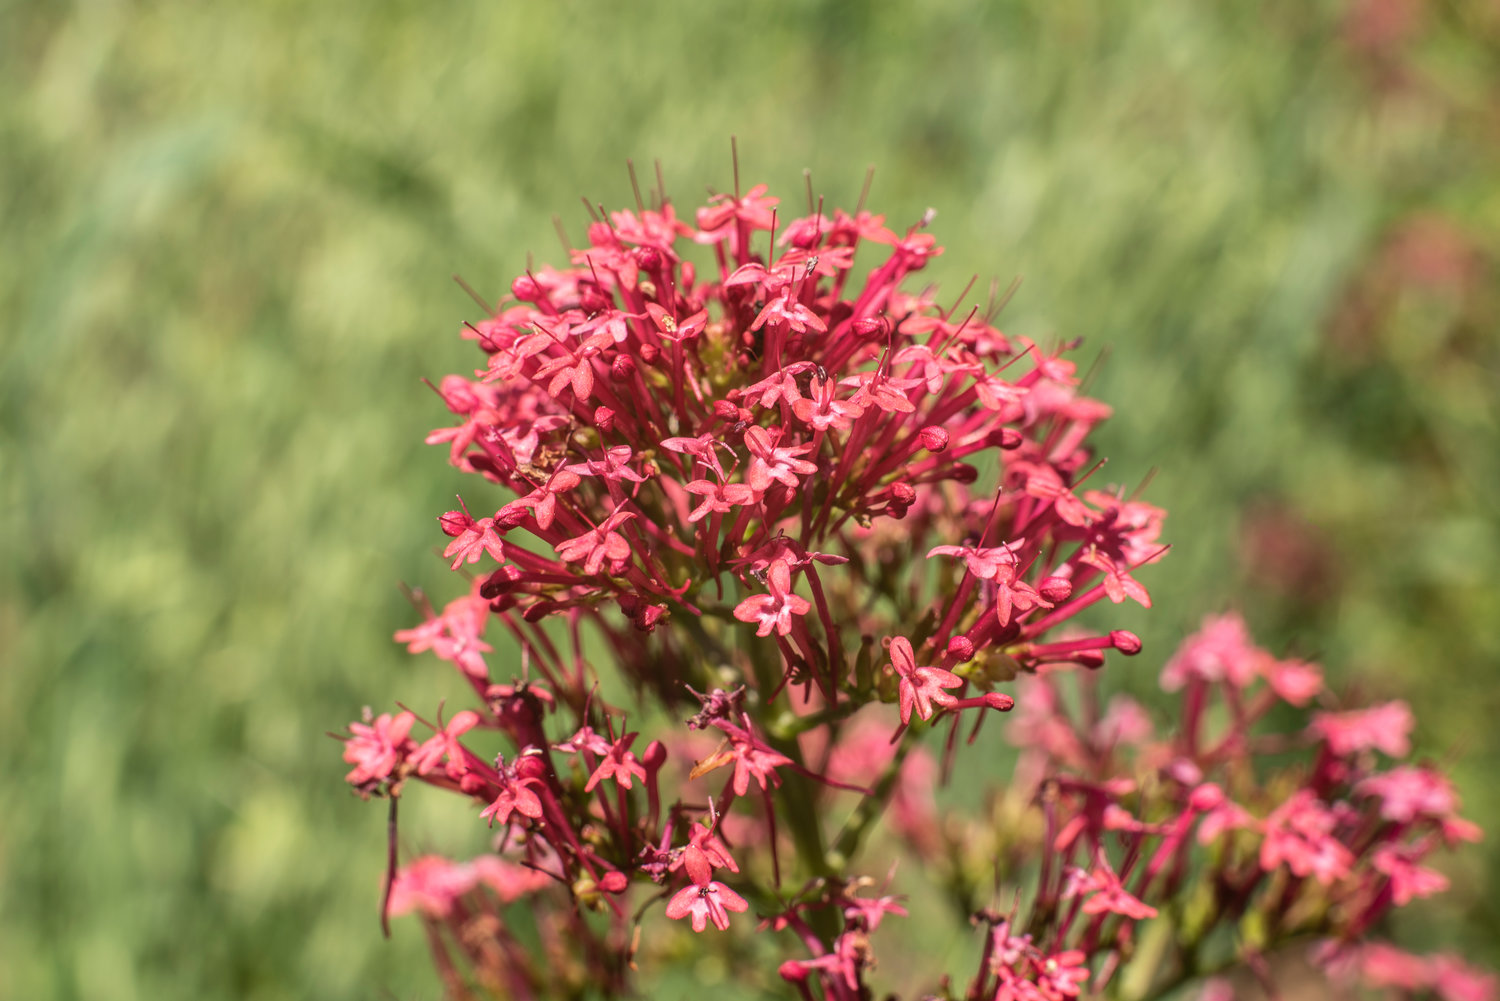 These are the tiny red blossoms at the inflorescence of a red valerian flower, also known as Jupiter's Beard and other names.